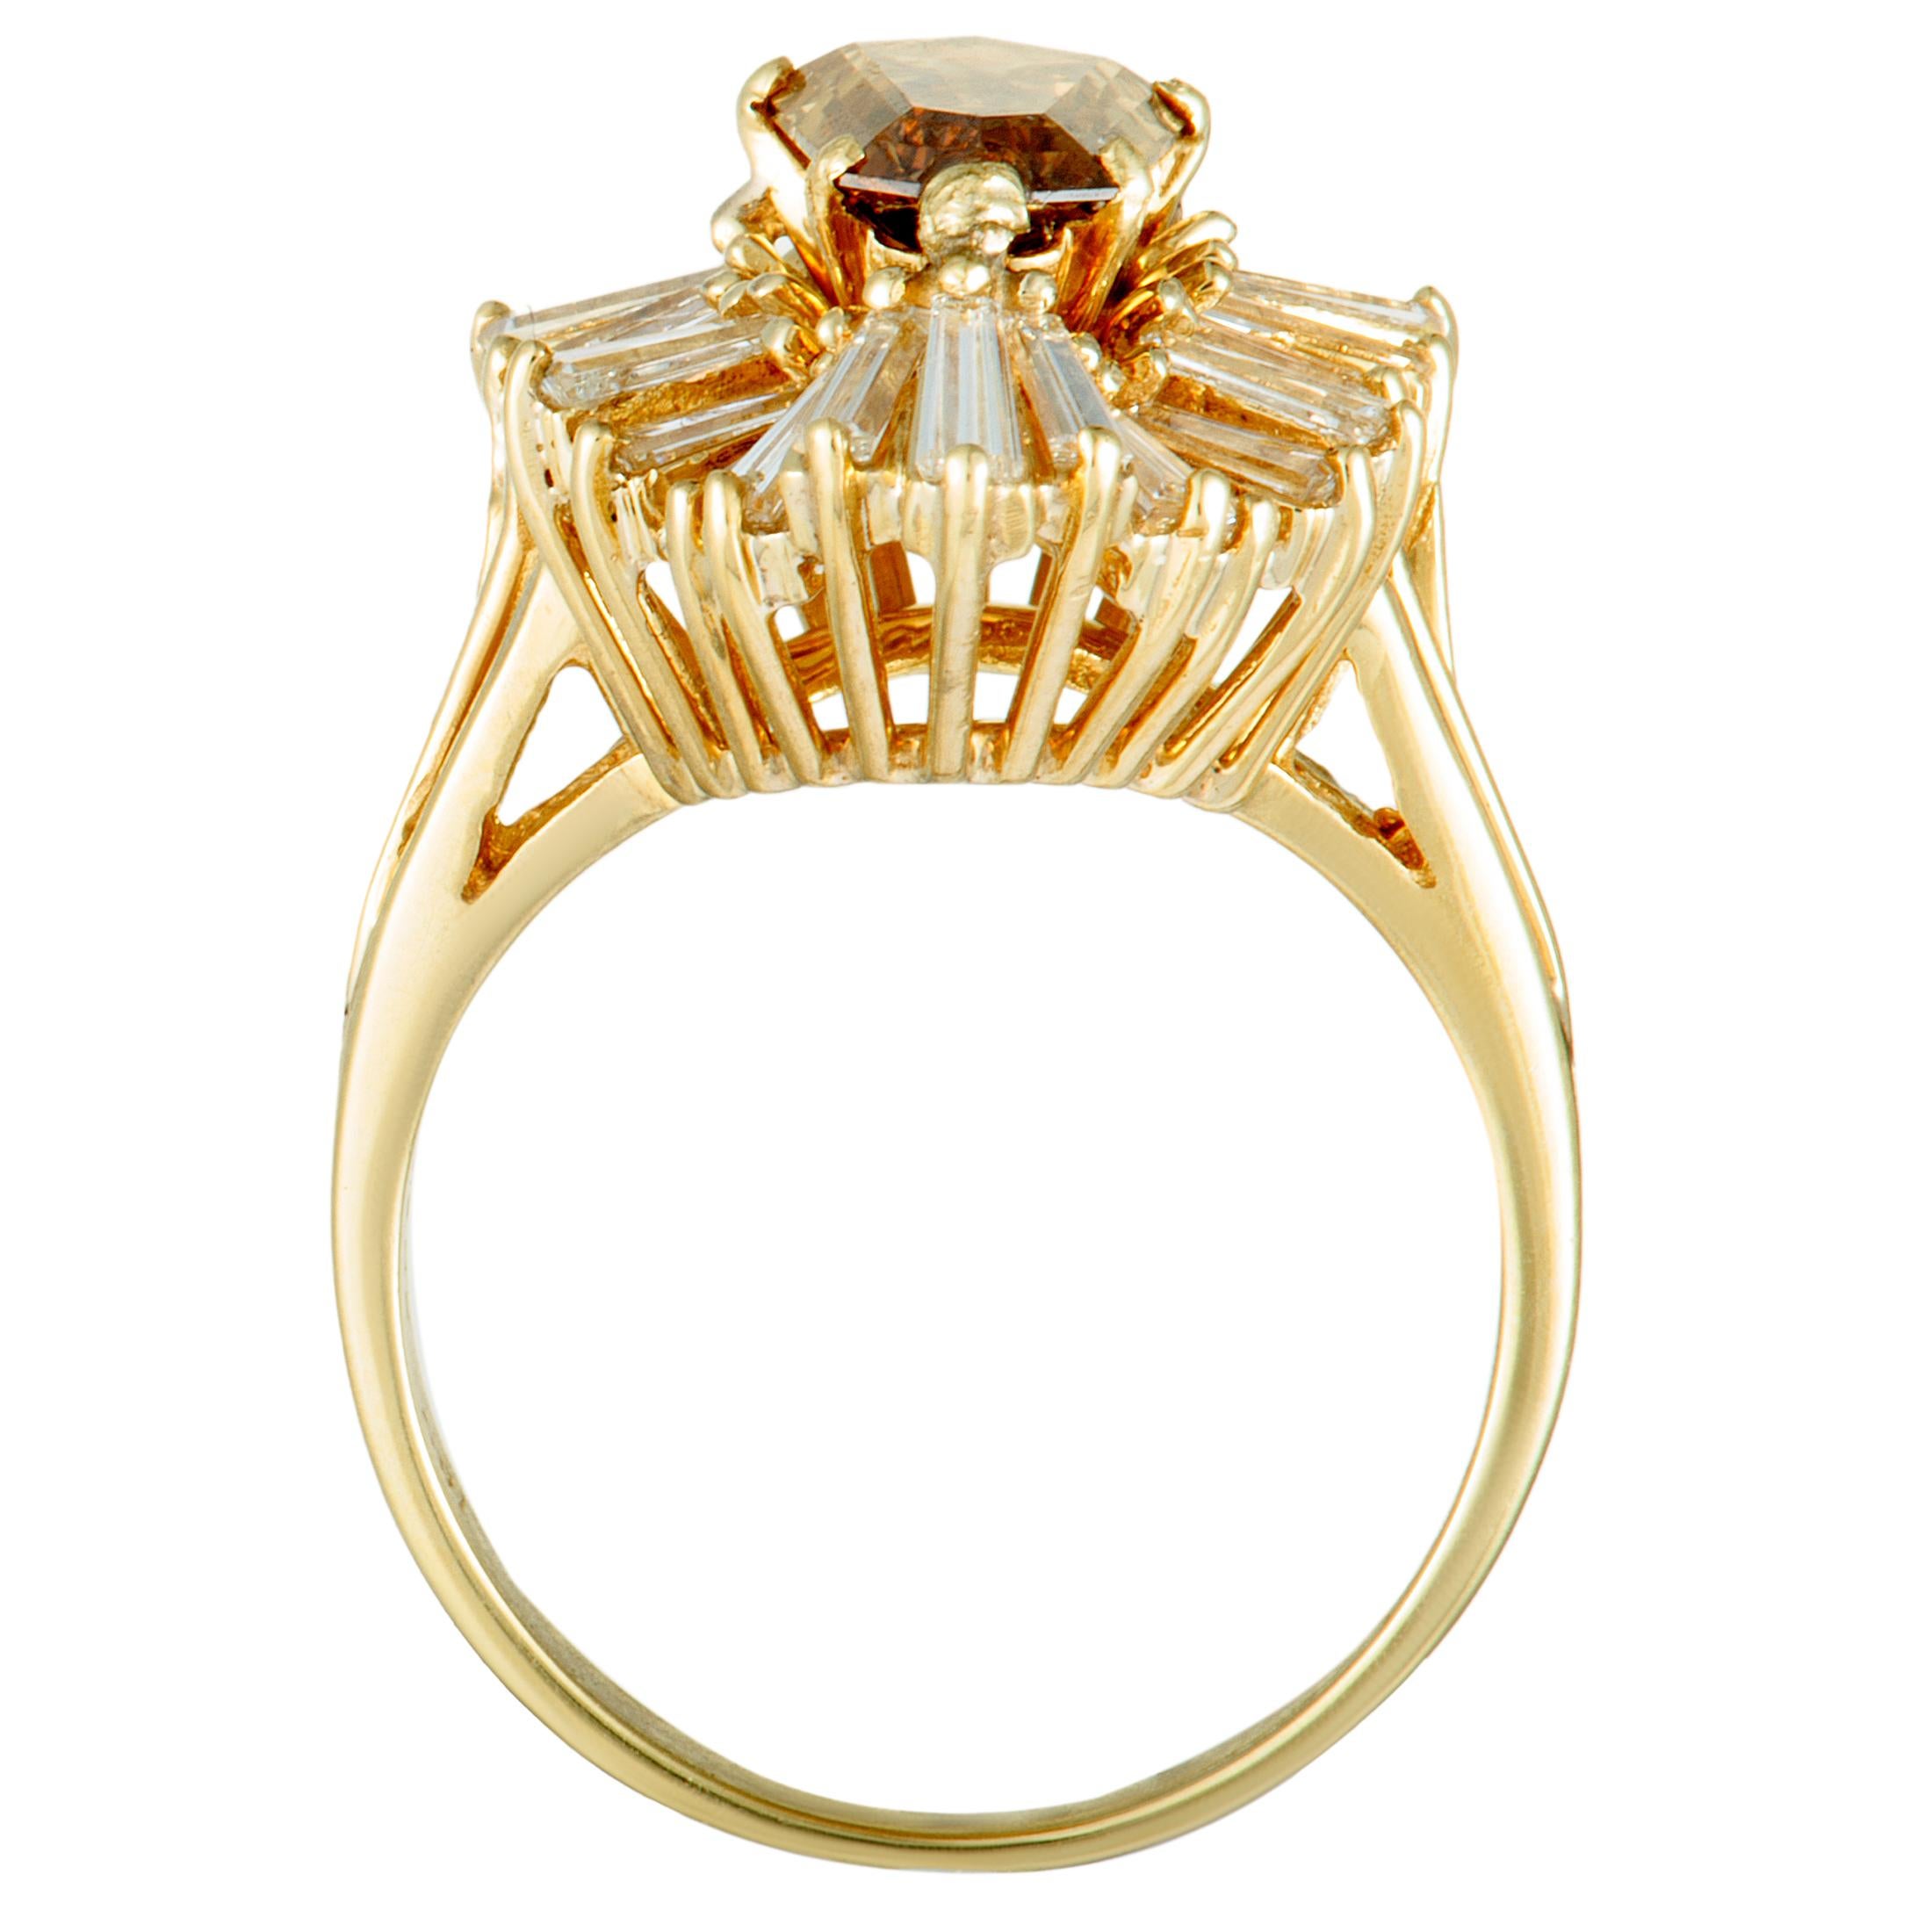 An incredibly attractive embodiment of luxe sophistication, this fabulous ring boasts a stunningly extravagant appeal and it will elevate your style in an exceptionally prestigious fashion. The ring is crafted from 18K yellow gold and it is